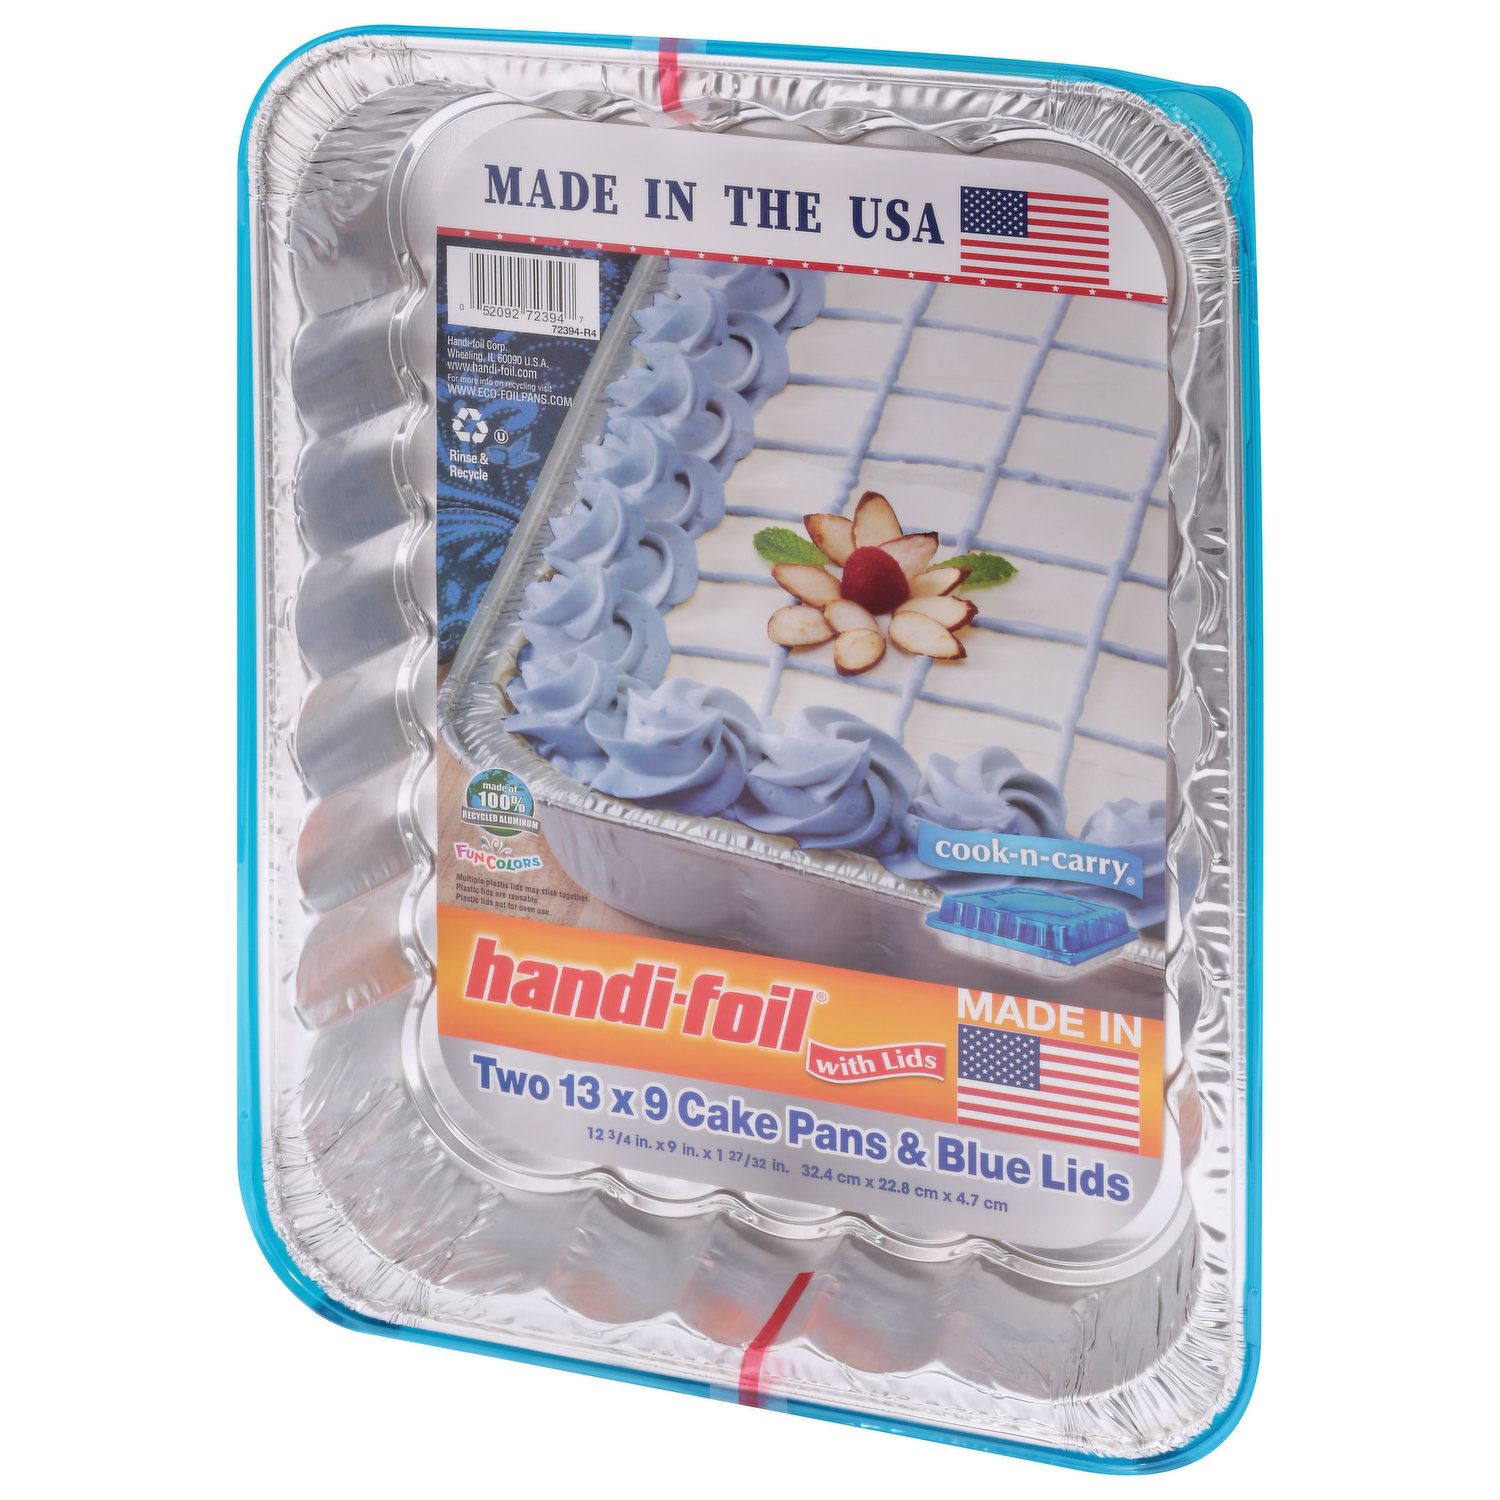 HANDI FOIL HEALTHY ROASTER/BAKER PANS WITH GREASE ABSORBING LINER 2CT